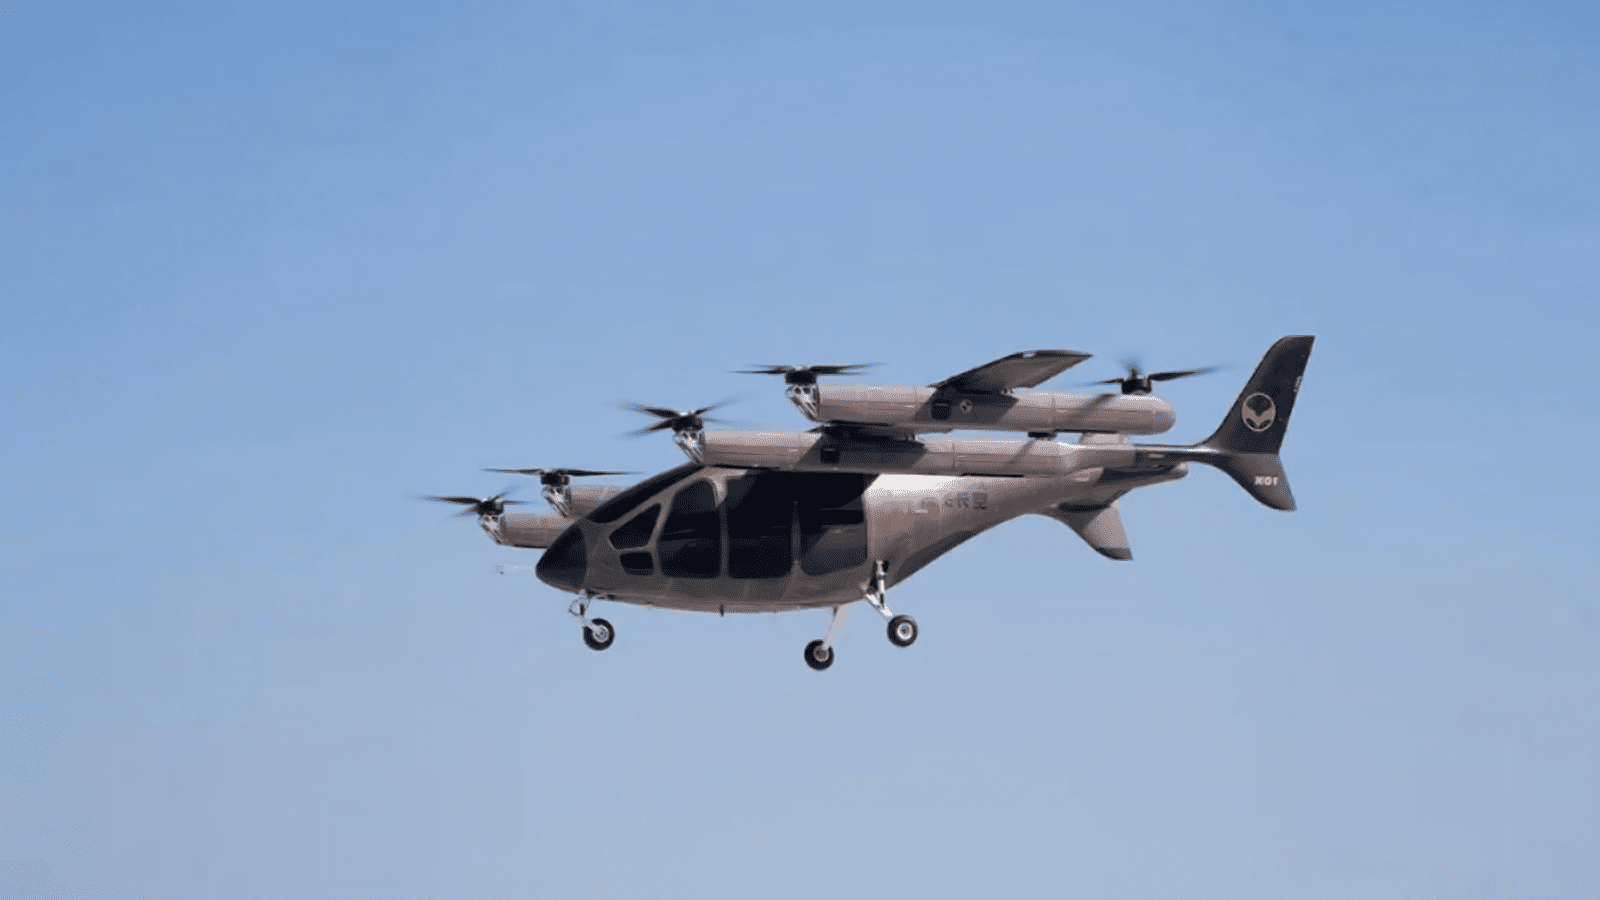 Geely eVTOL flying in a clear blue sky